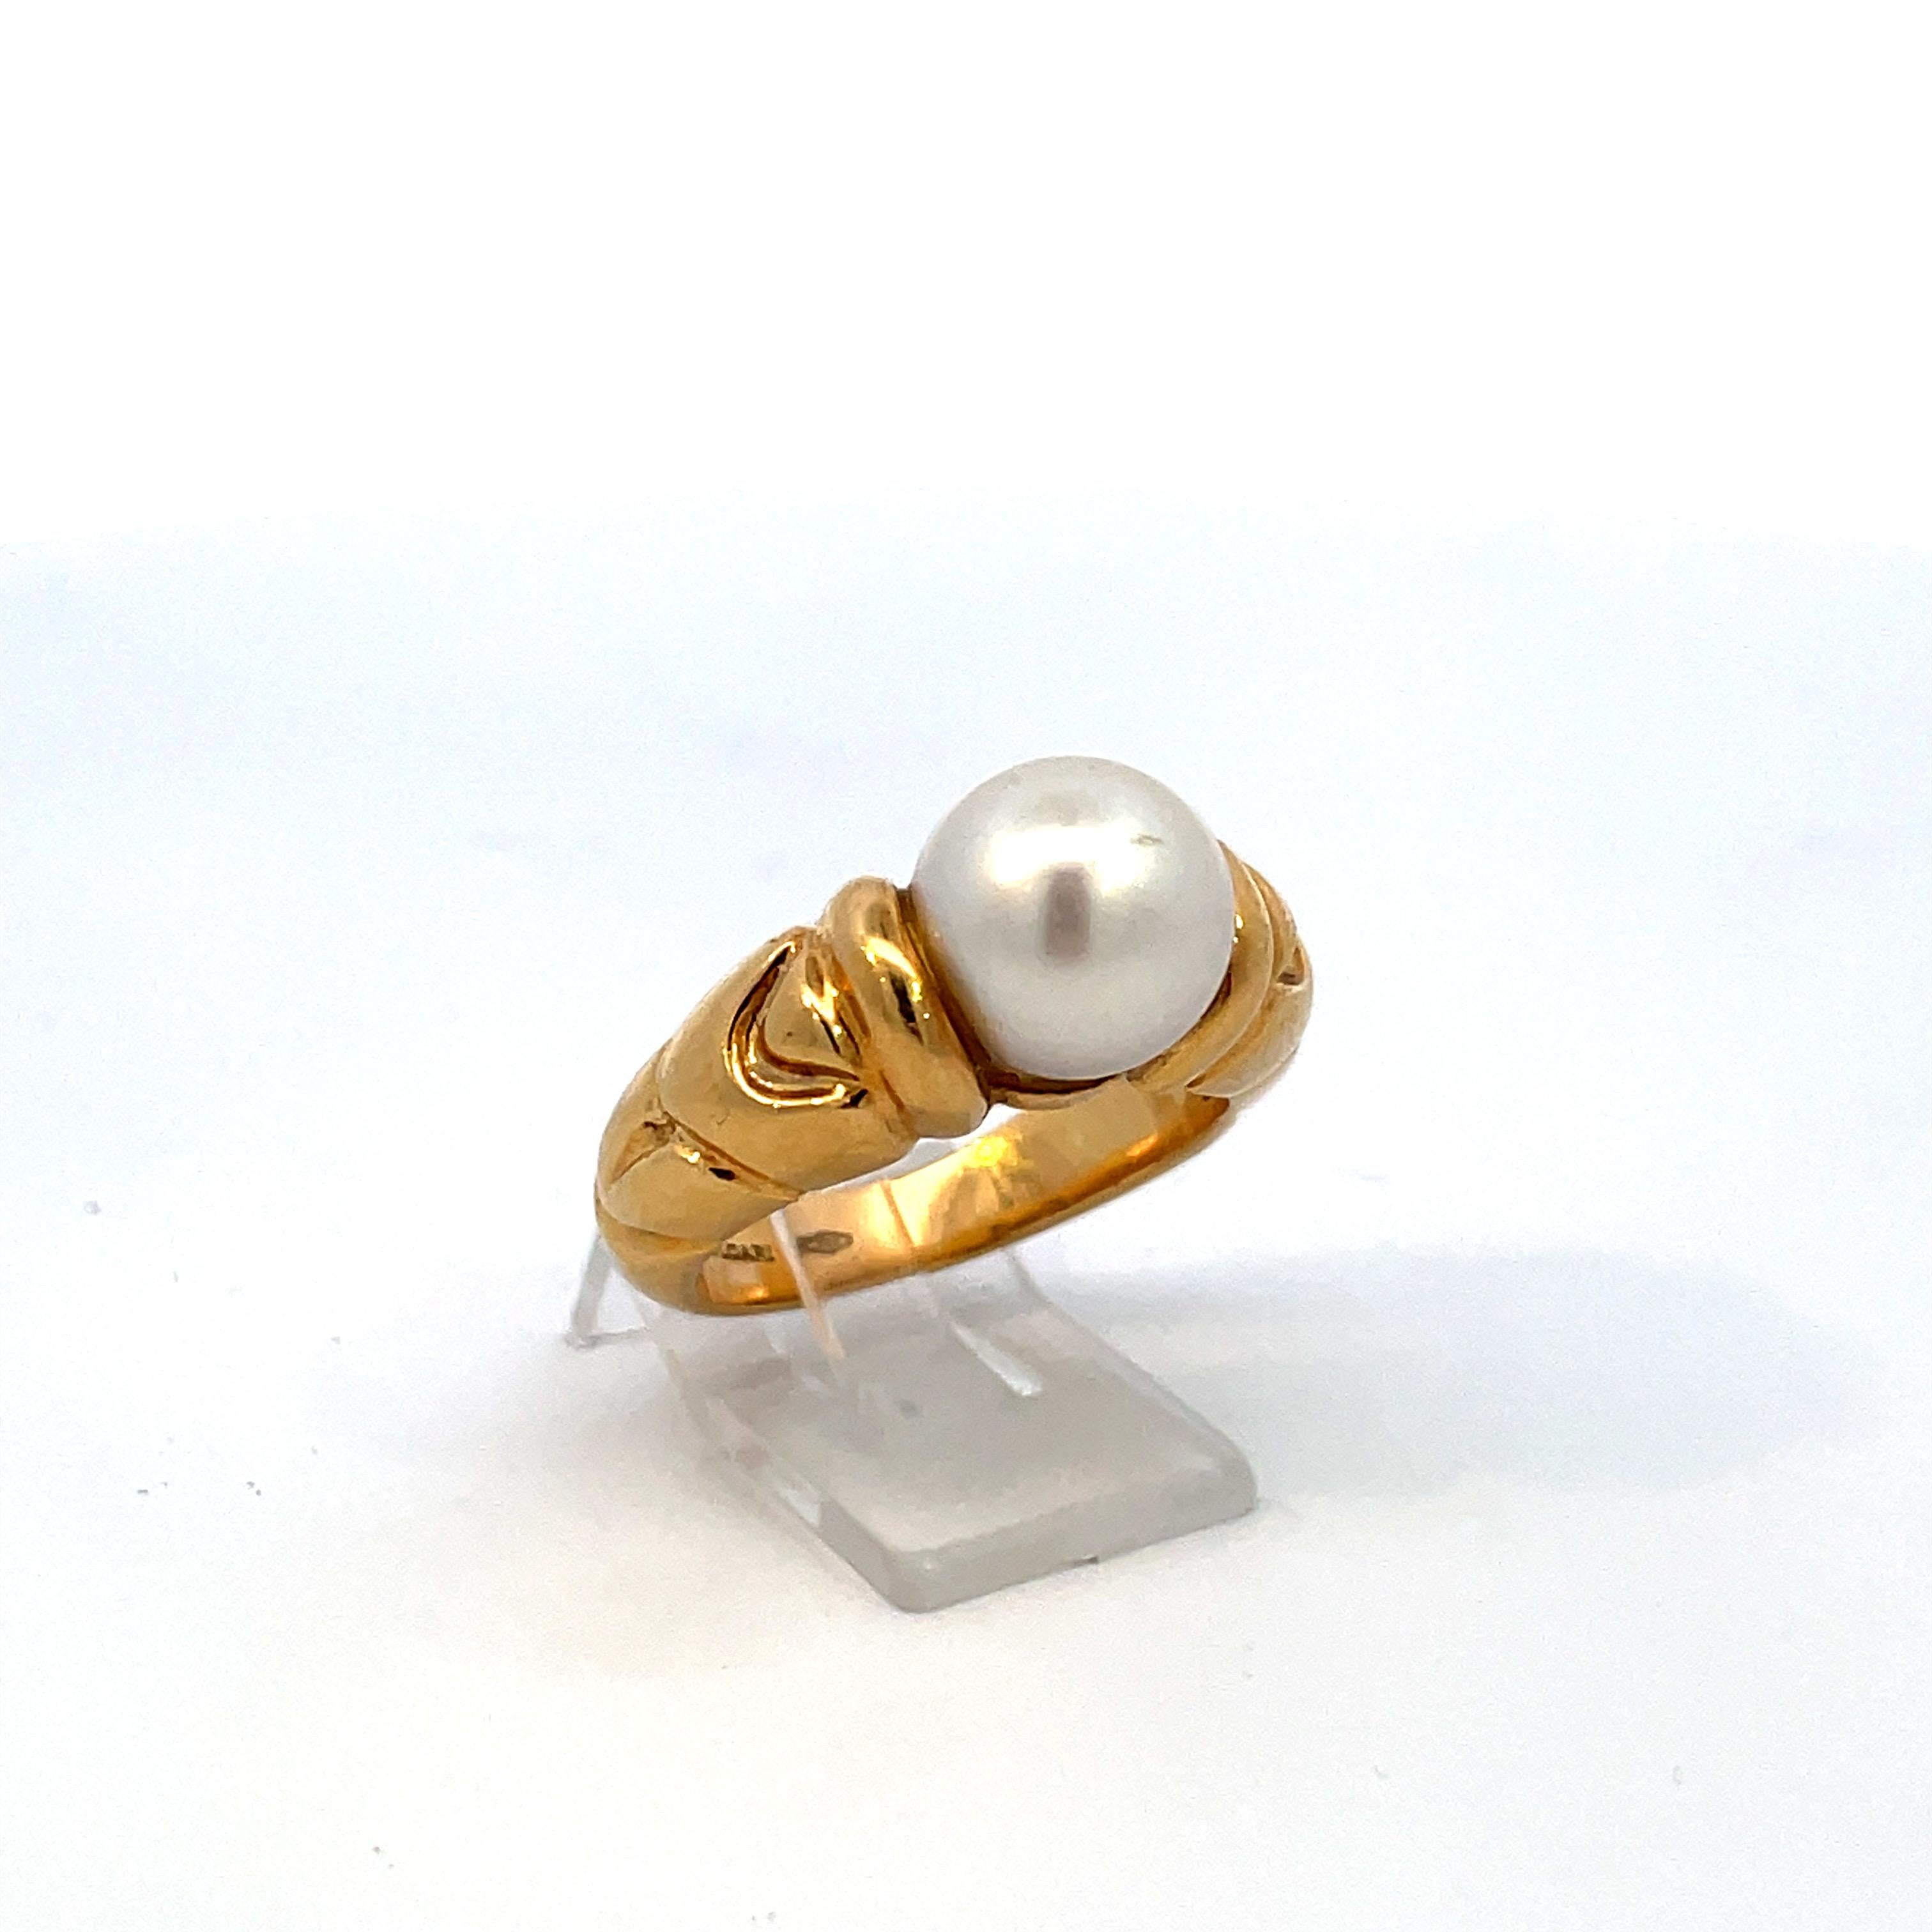 Bulgari Passo Doppio collection Cultered Pearl and 18kt yellow gold, stamped Bulgari.

